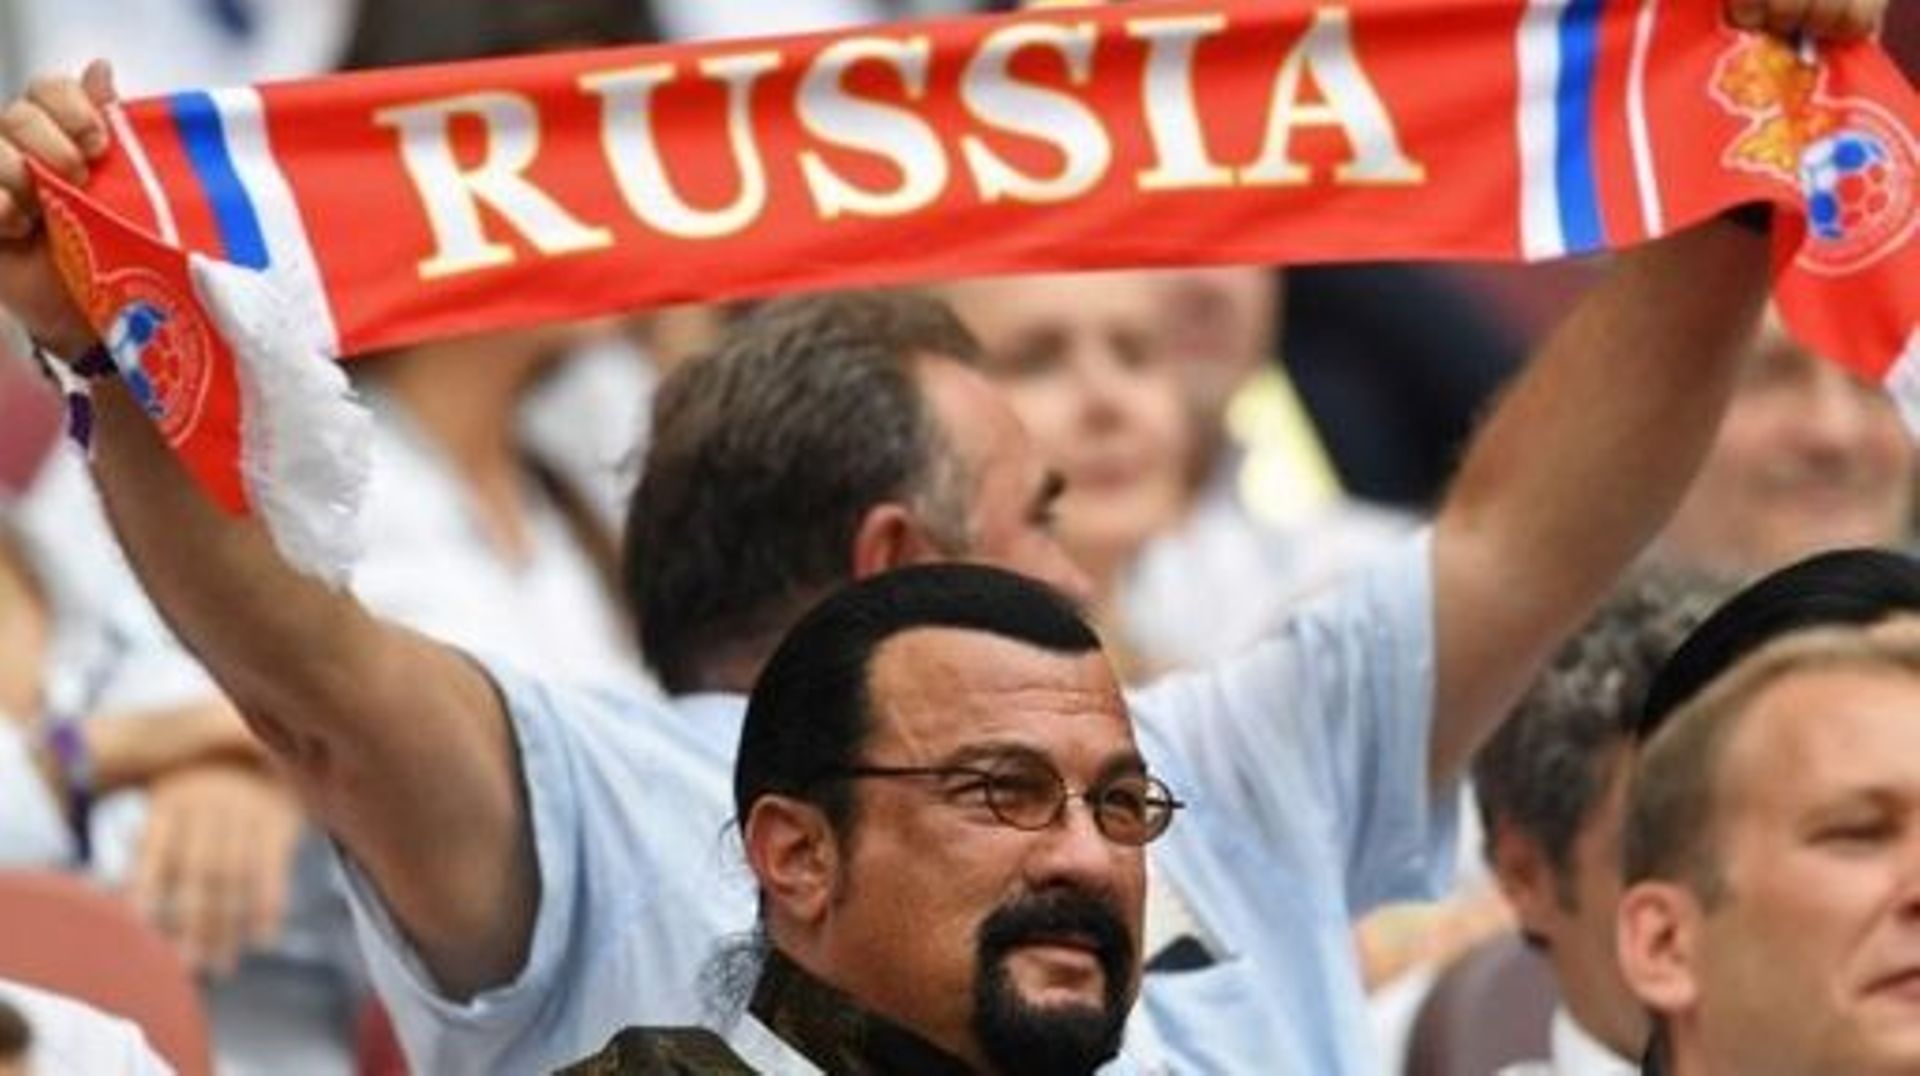 US actor Steven Seagal attends the Russia 2018 World Cup final football match between France and Croatia at the Luzhniki Stadium in Moscow on July 15, 2018. Kirill KUDRYAVTSEV / AFP RESTRICTED TO EDITORIAL USE – NO MOBILE PUSH ALERTS/DOWNLOADS

